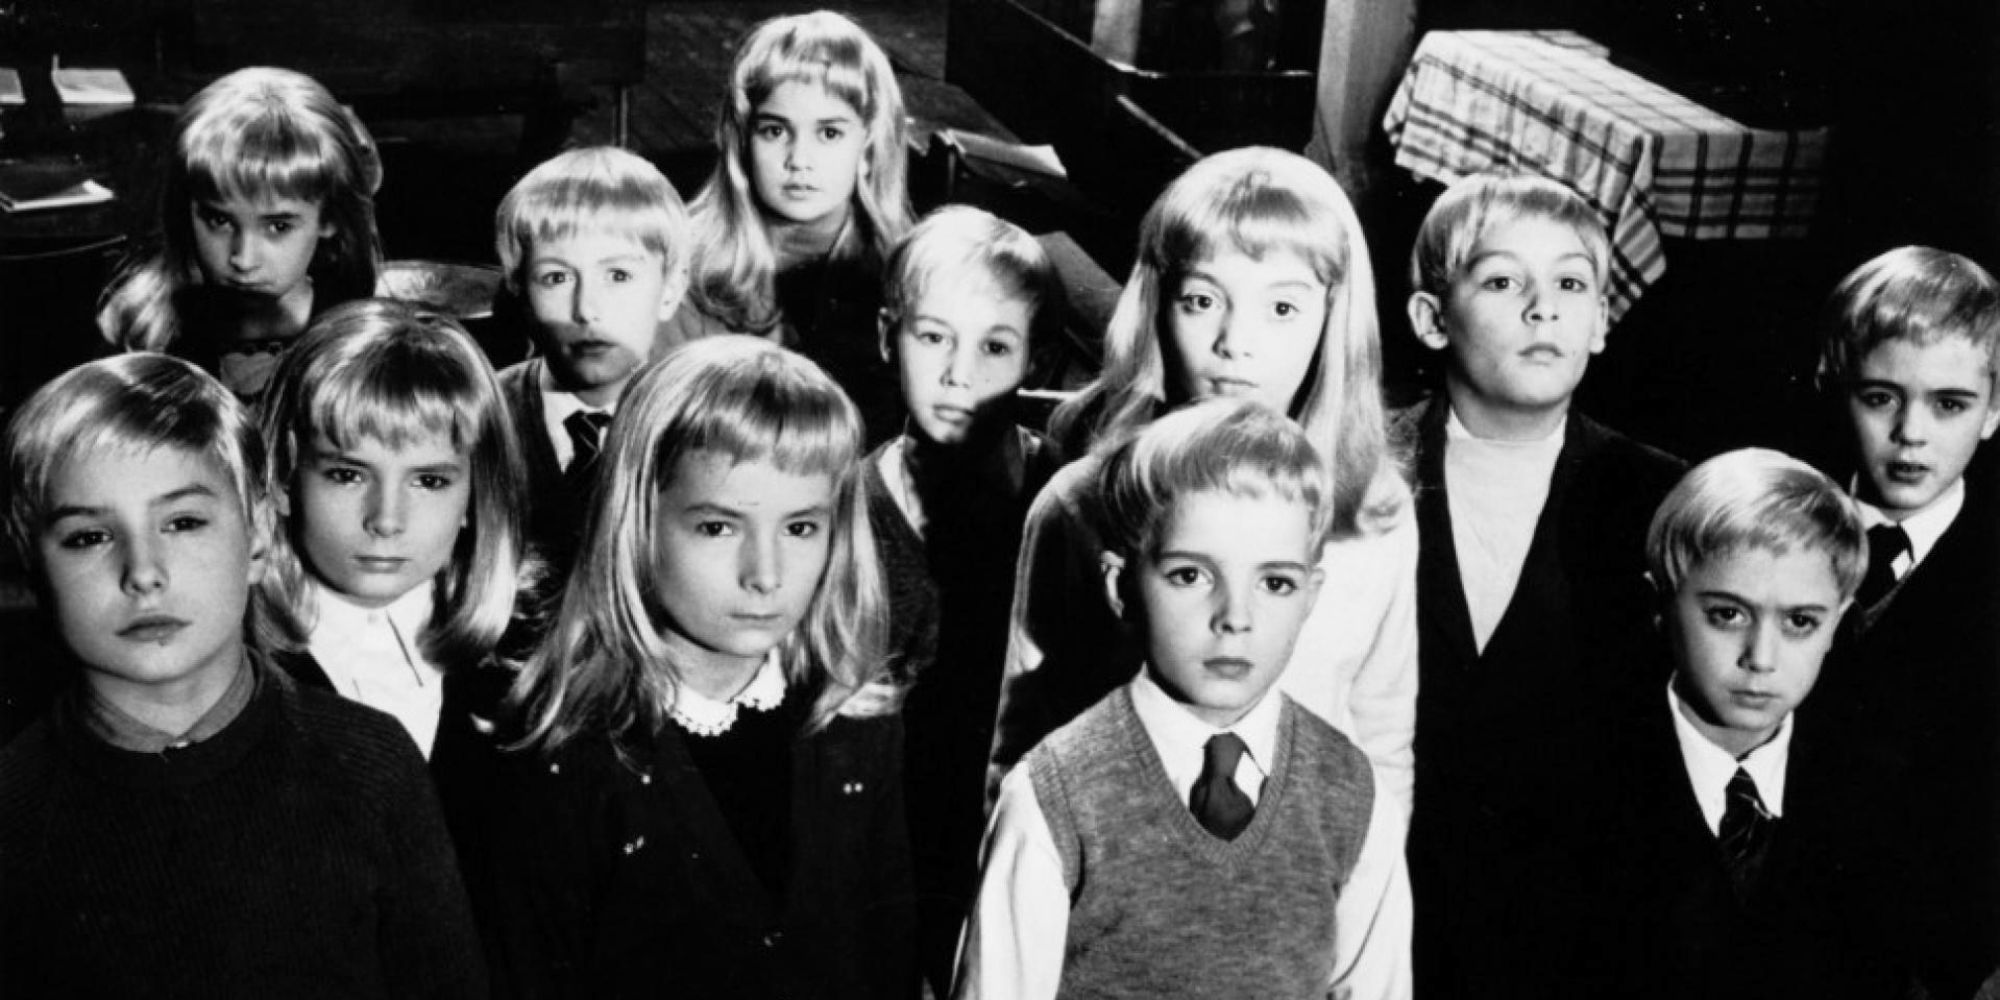 The children in Village of the Damned